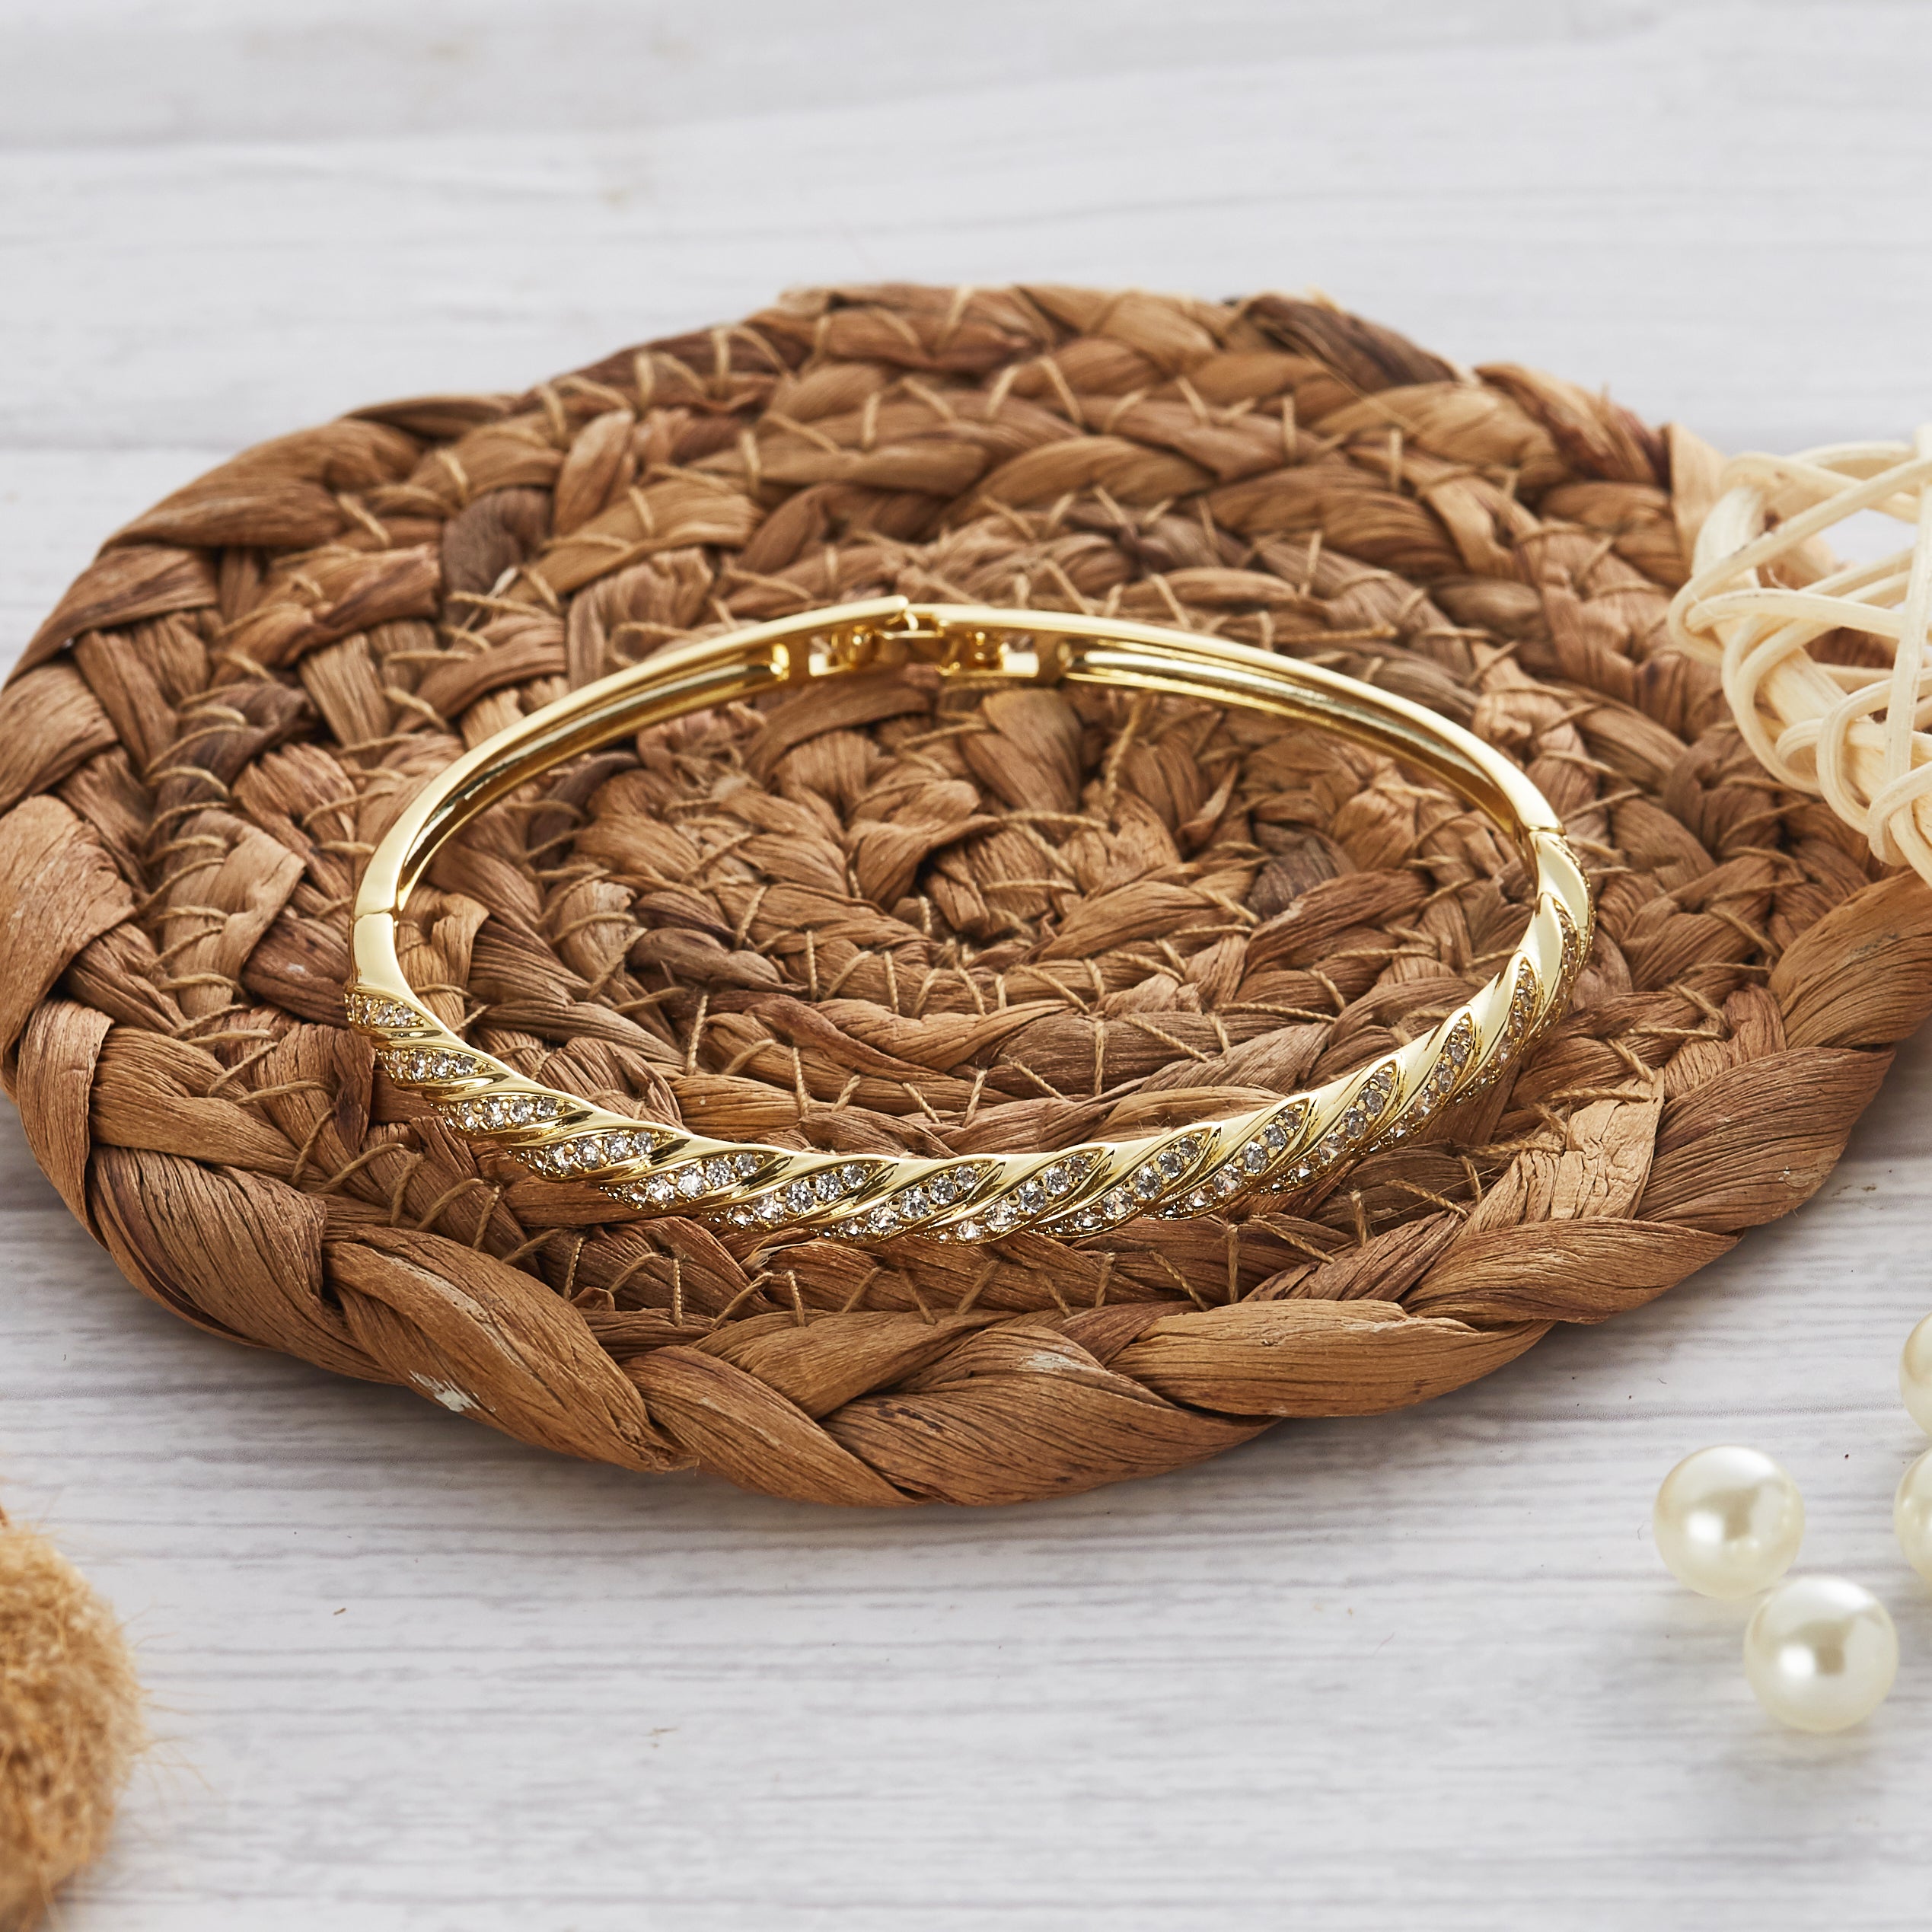 Gold Plated Twist Bangle Created with Zircondia® Crystals